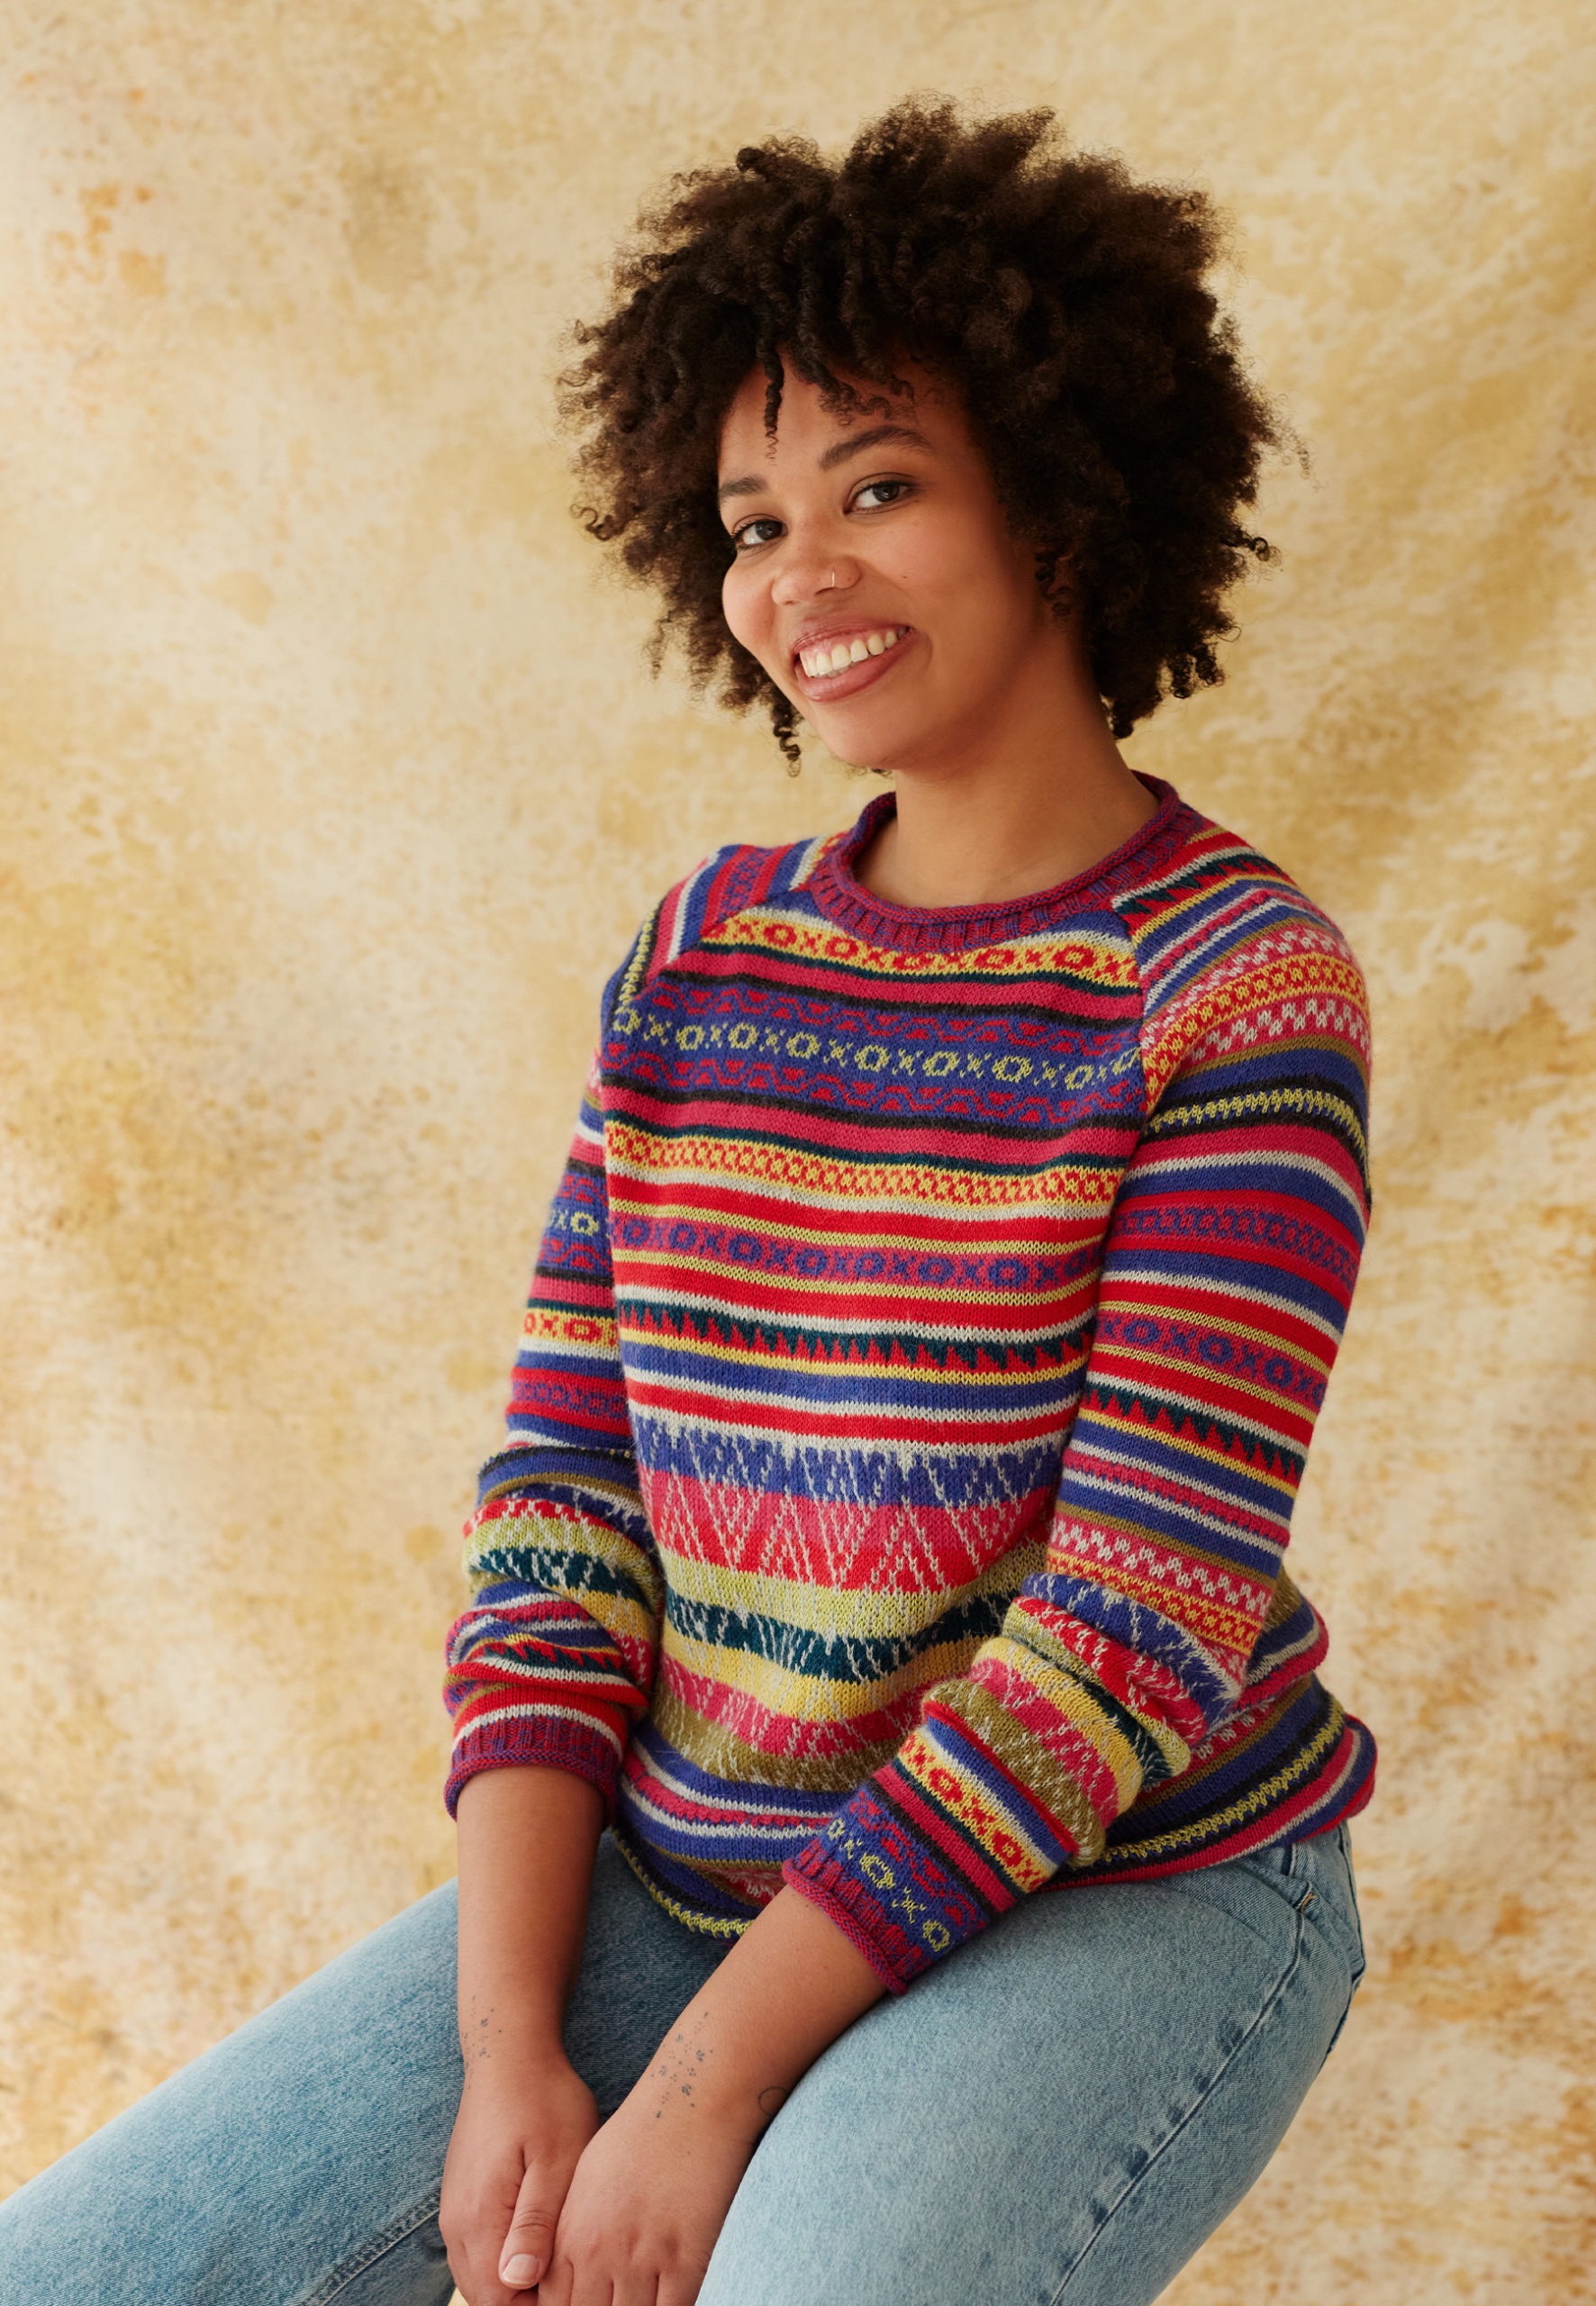 Knitted Sweater Cuzco Made Of 75% Alpaca Wool & 25% Cotton